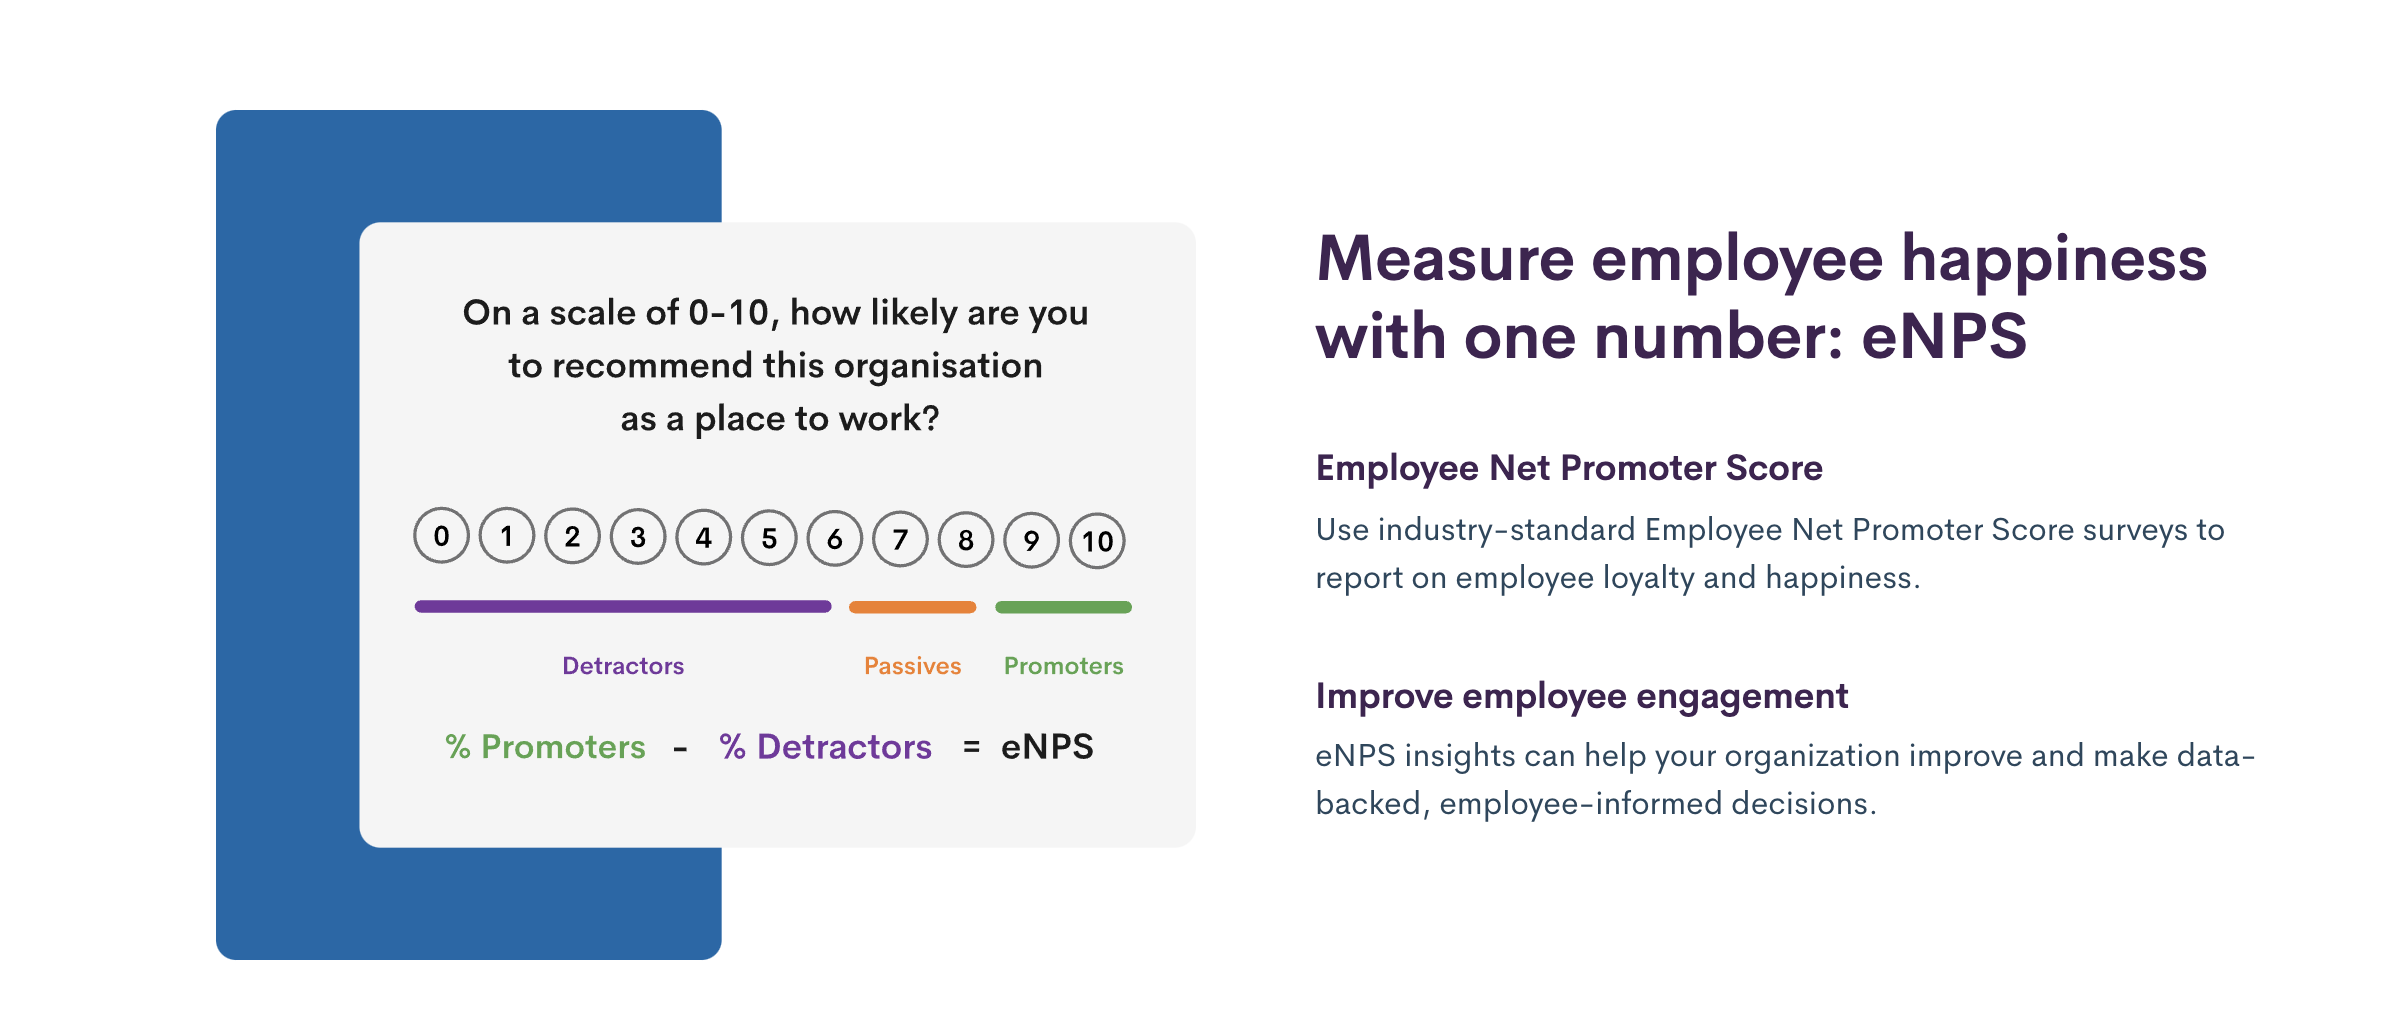 A scale to measure eNPS with an example: "On a scale of 0-10, how likely are you to recommend this organization as a place to work?"